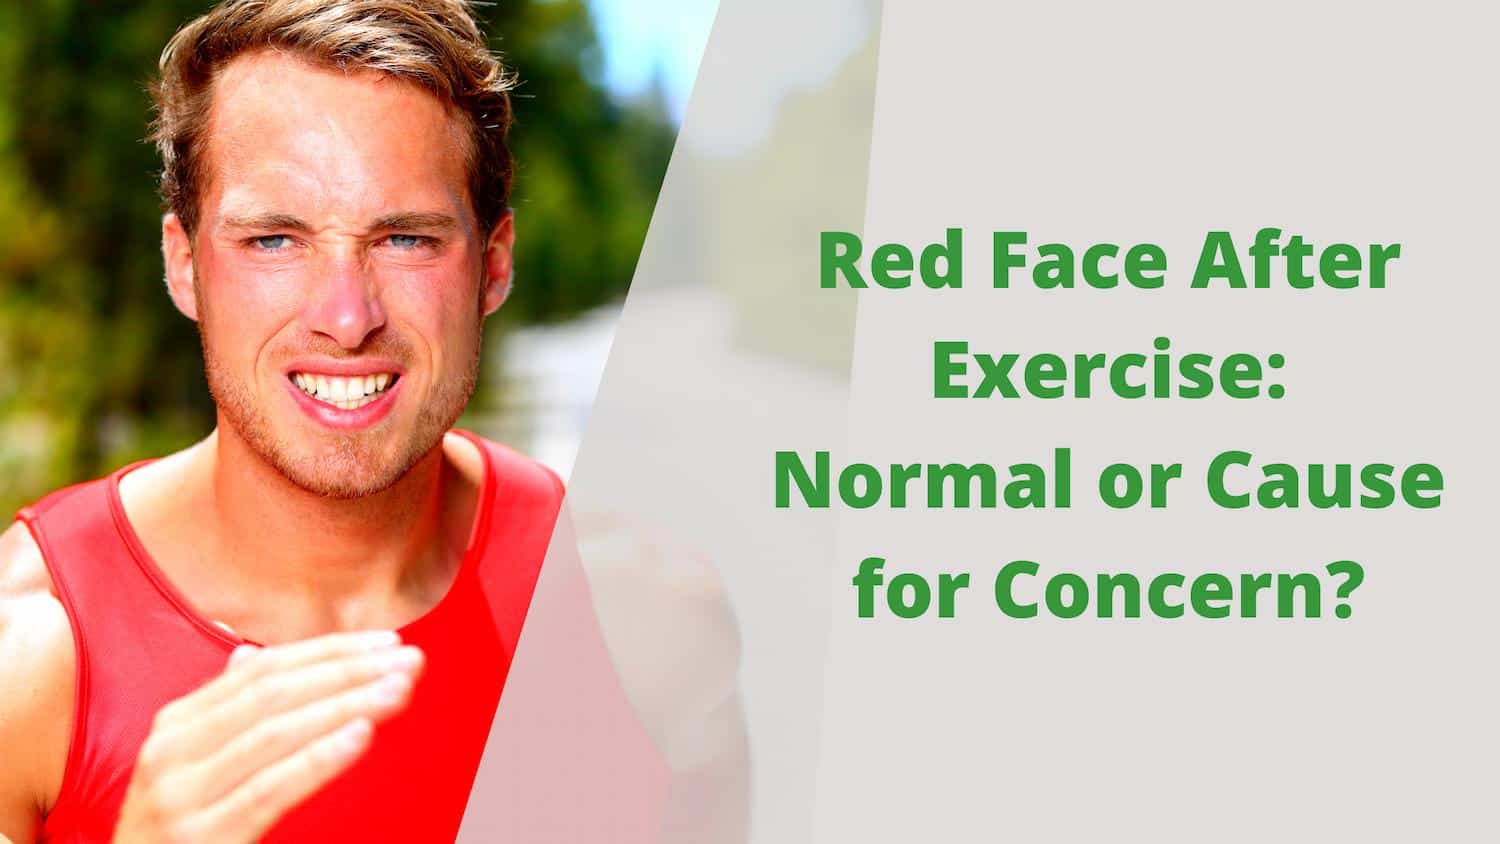 Red face after exercise